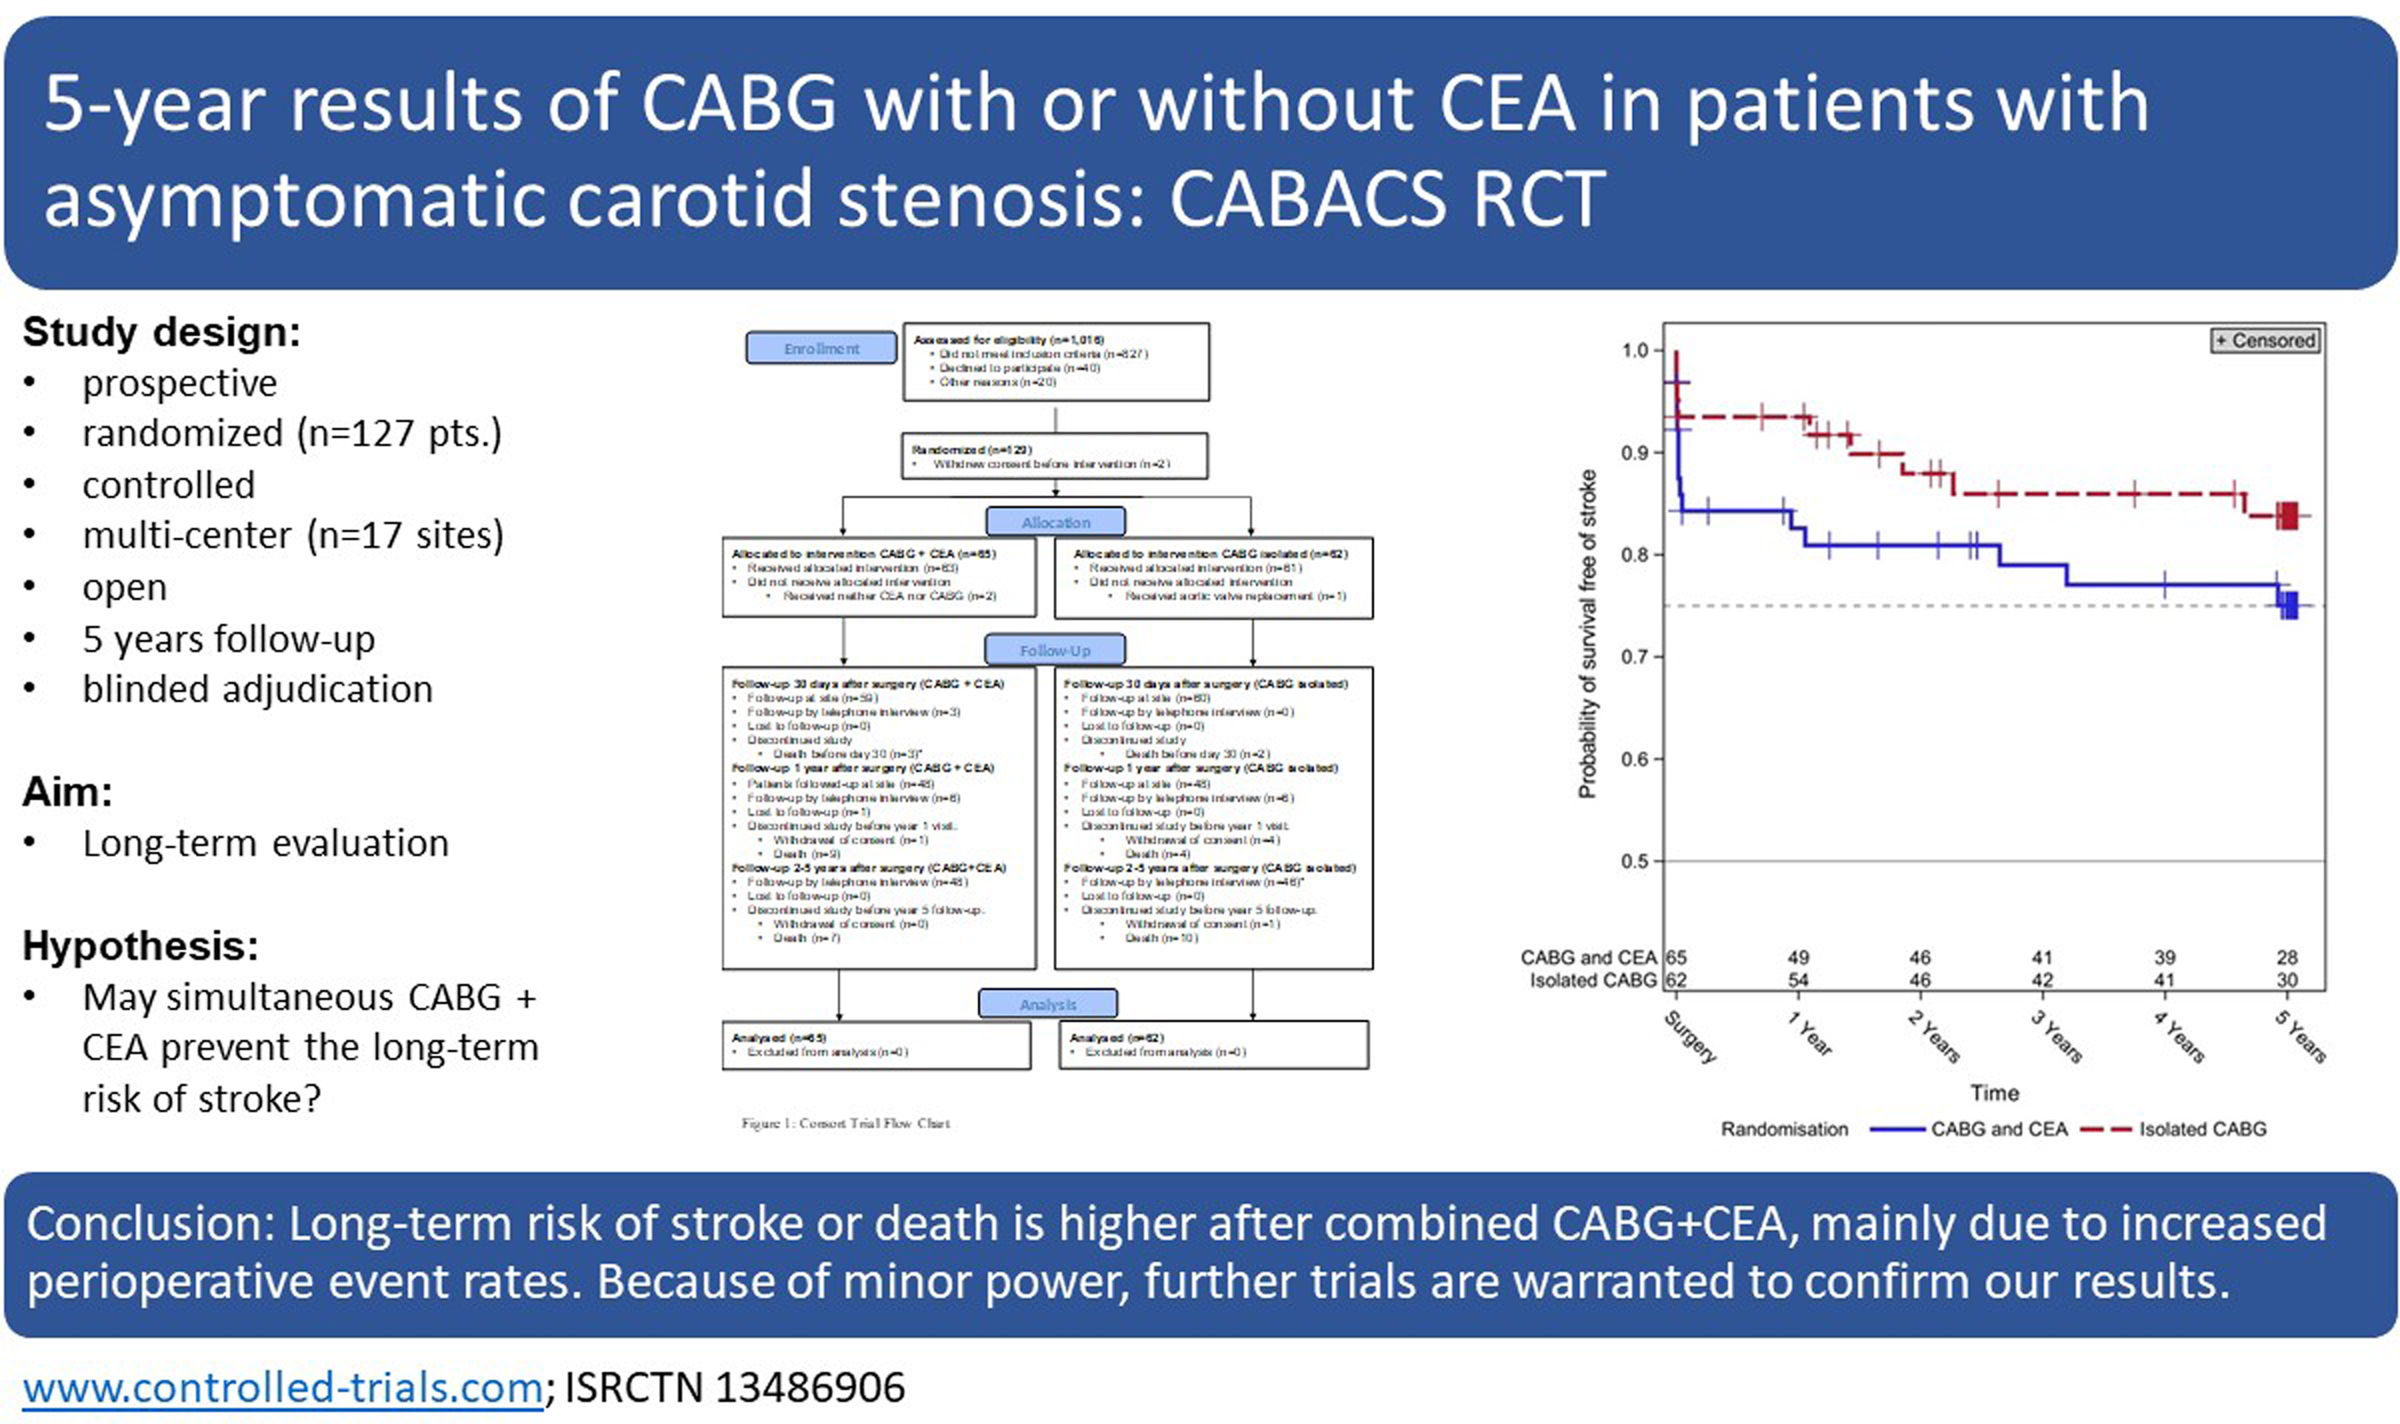 Five-Year Results of Coronary Artery Bypass Grafting With or Without Carotid Endarterectomy in Patients With Asymptomatic Carotid Artery Stenosis: CABACS RCT